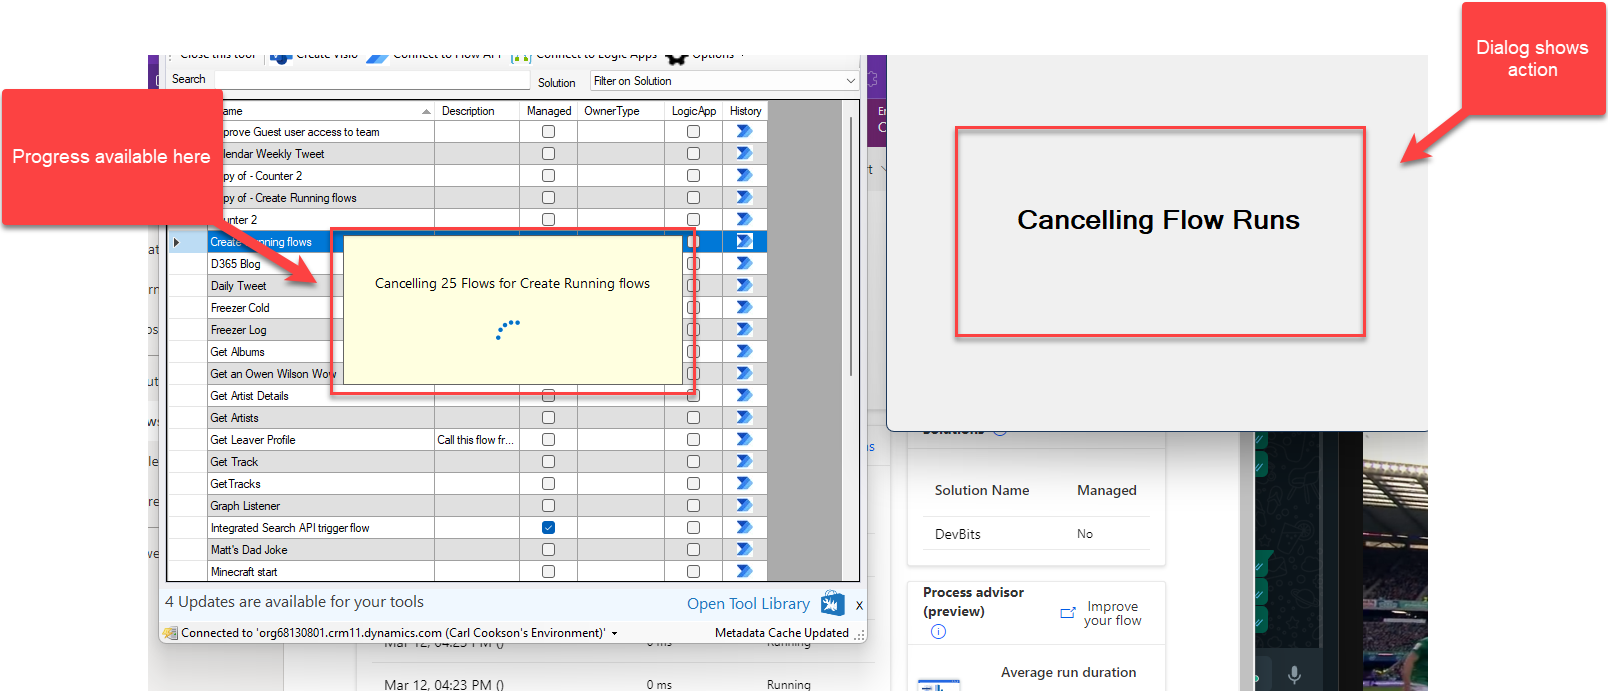 Image showing cancelling flow progress